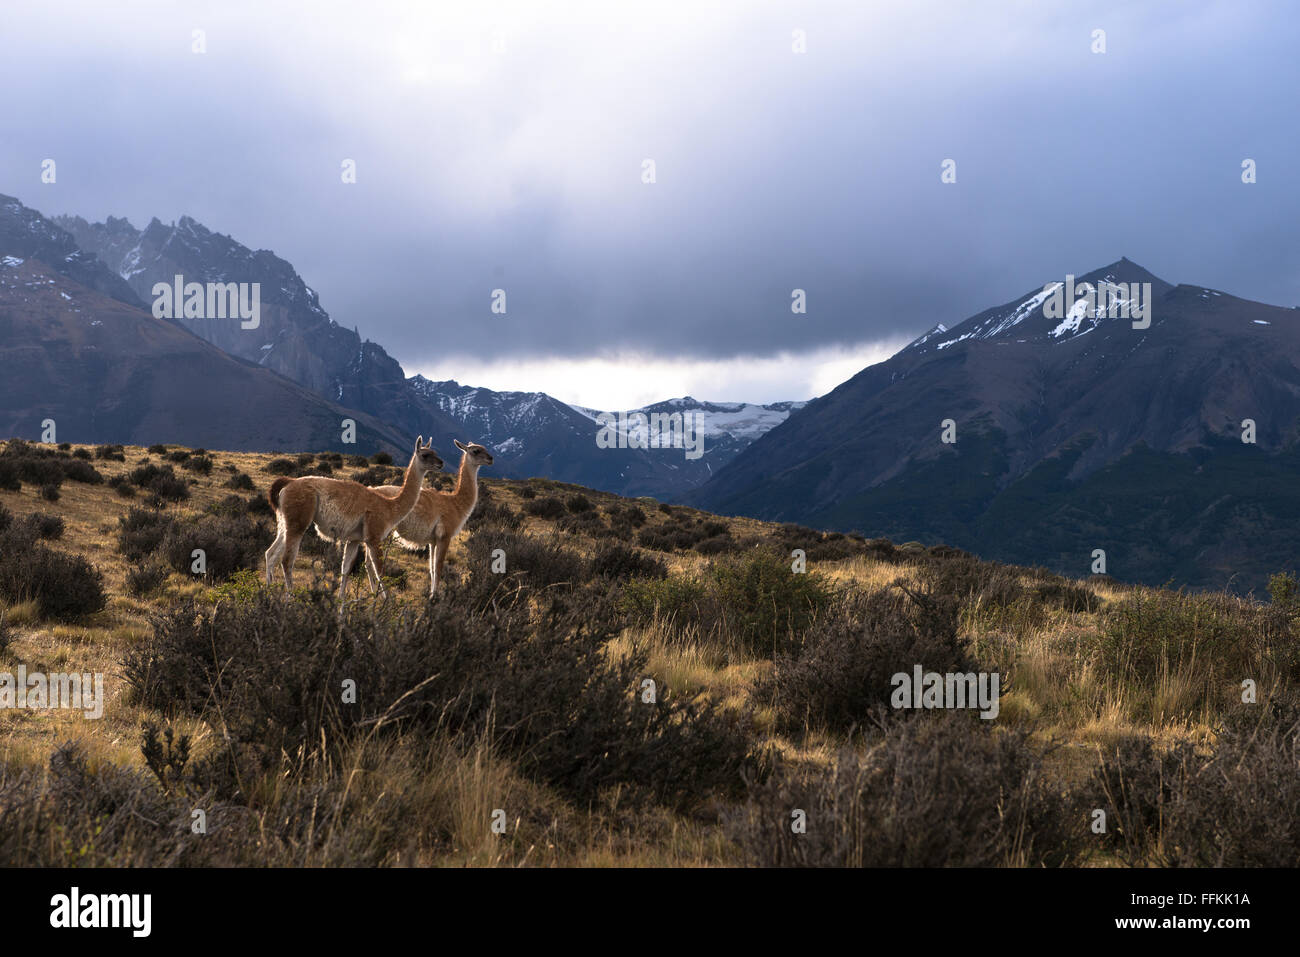 A couple of Guanacos overlooking the landscape in Torres del Paine National Park Stock Photo